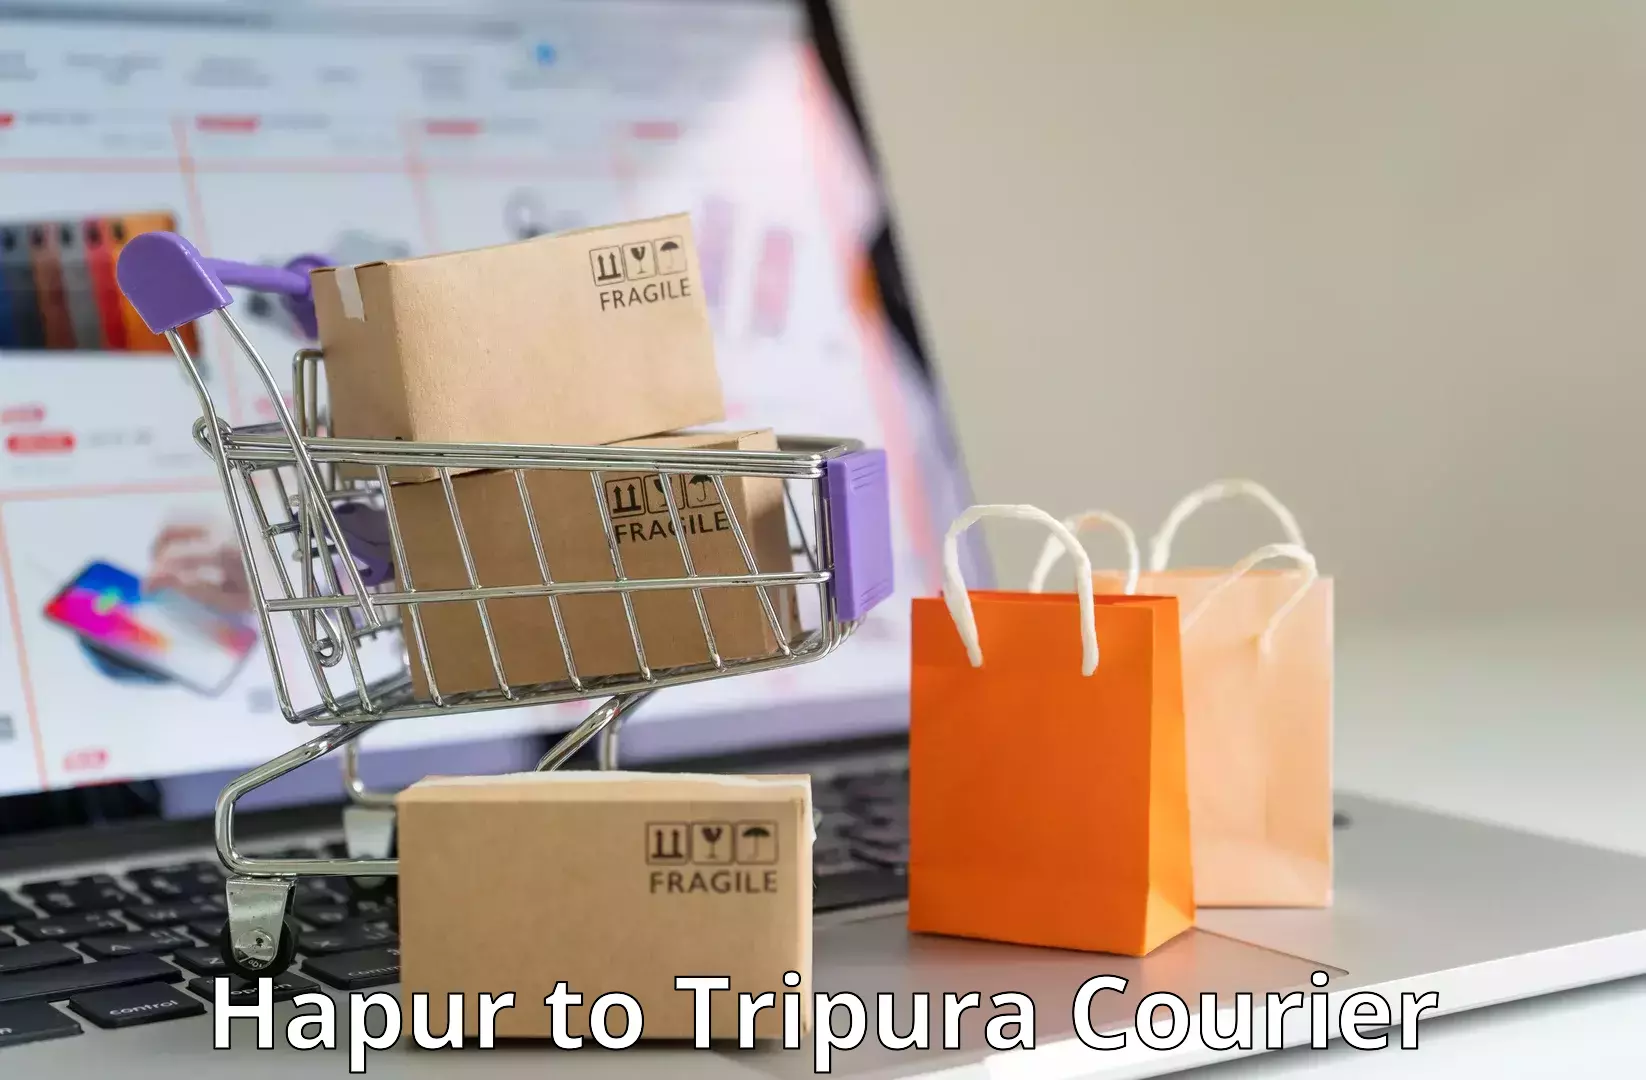 On-demand courier Hapur to Tripura